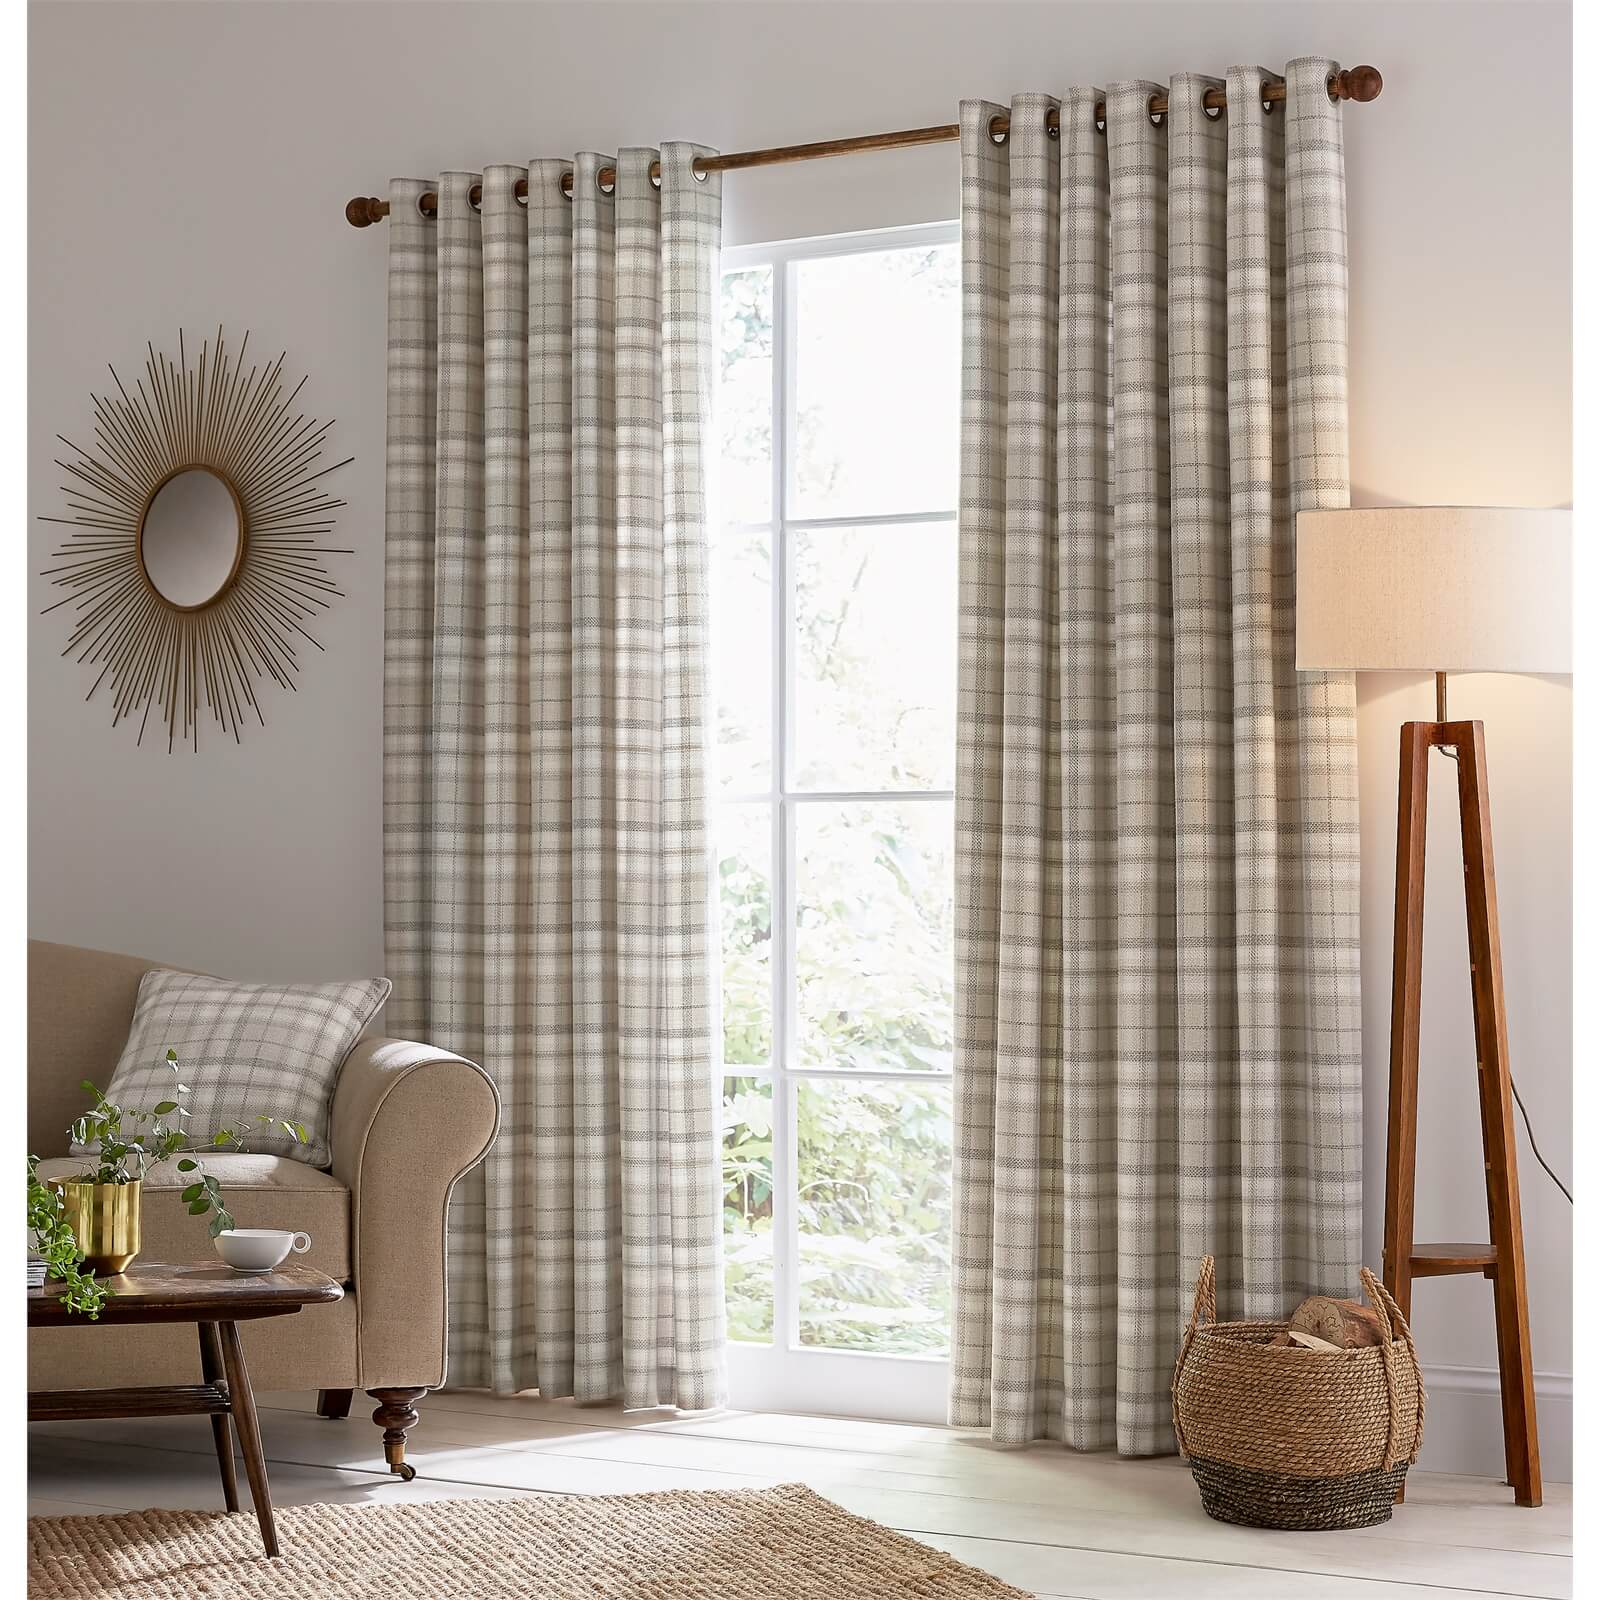 Helena Springfield Harriet Lined Curtains 90 x 90 - Taupe